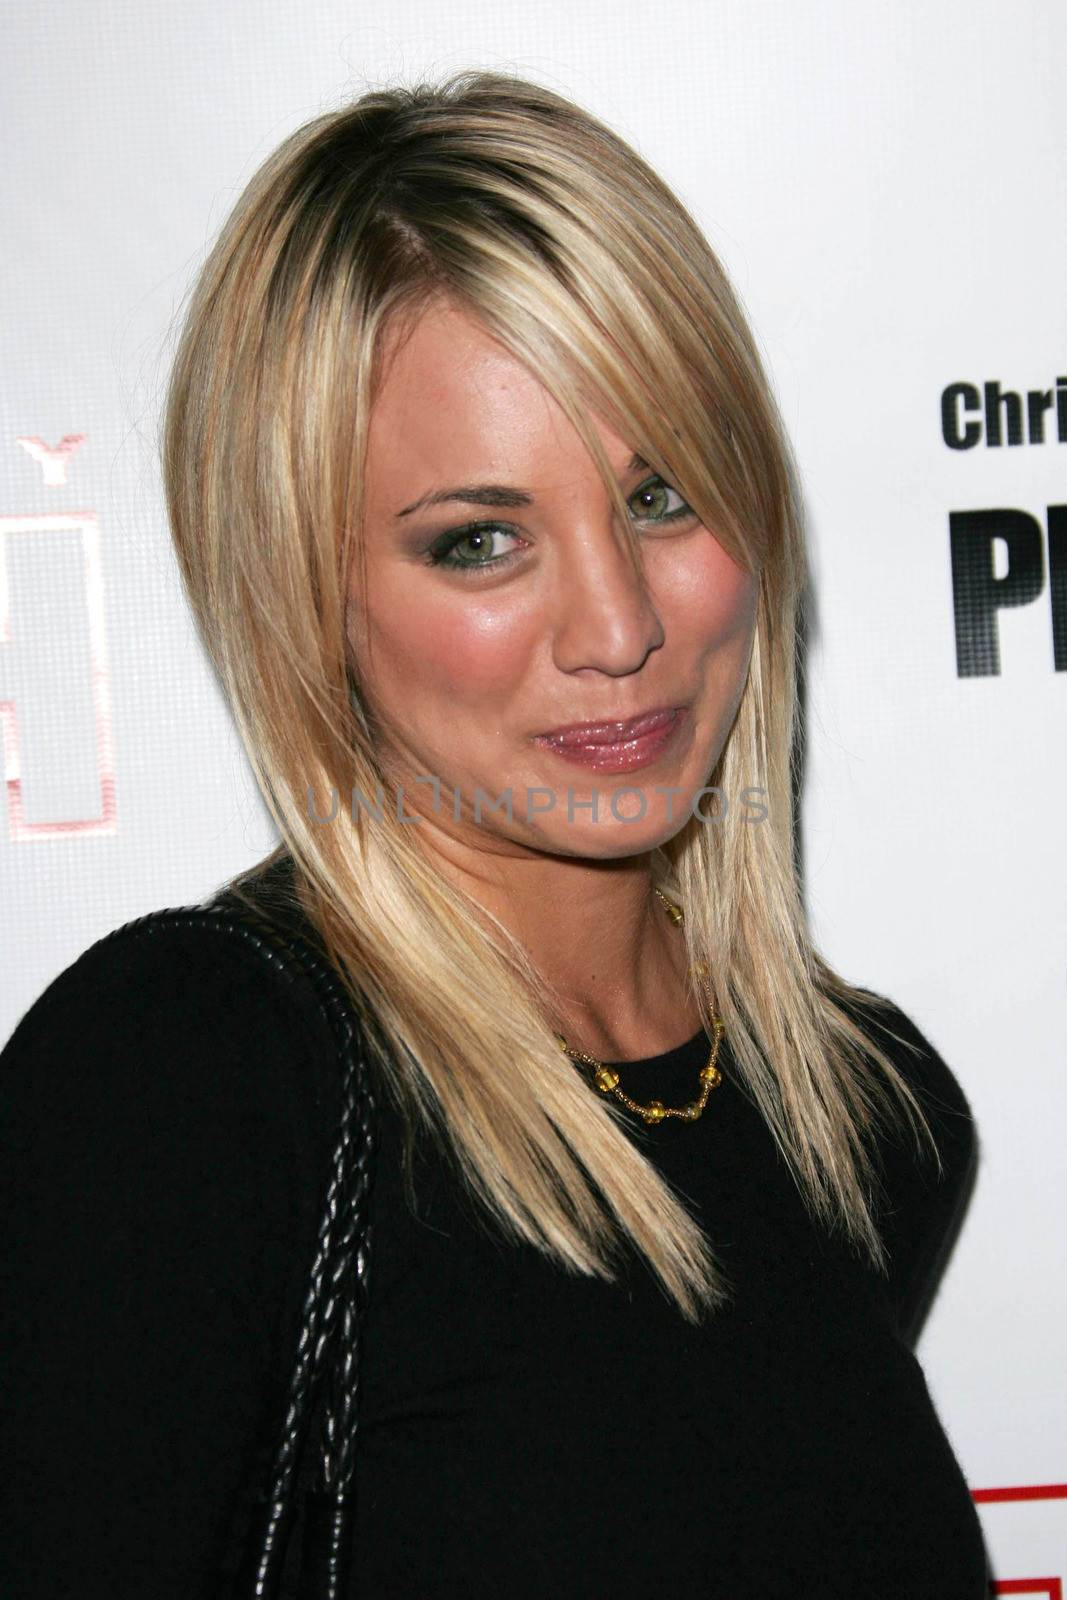 Kaley Cuoco at the In Touch Presents Pets And Their Stars Party, Cabana Club, Hollywood, CA 09-21-05